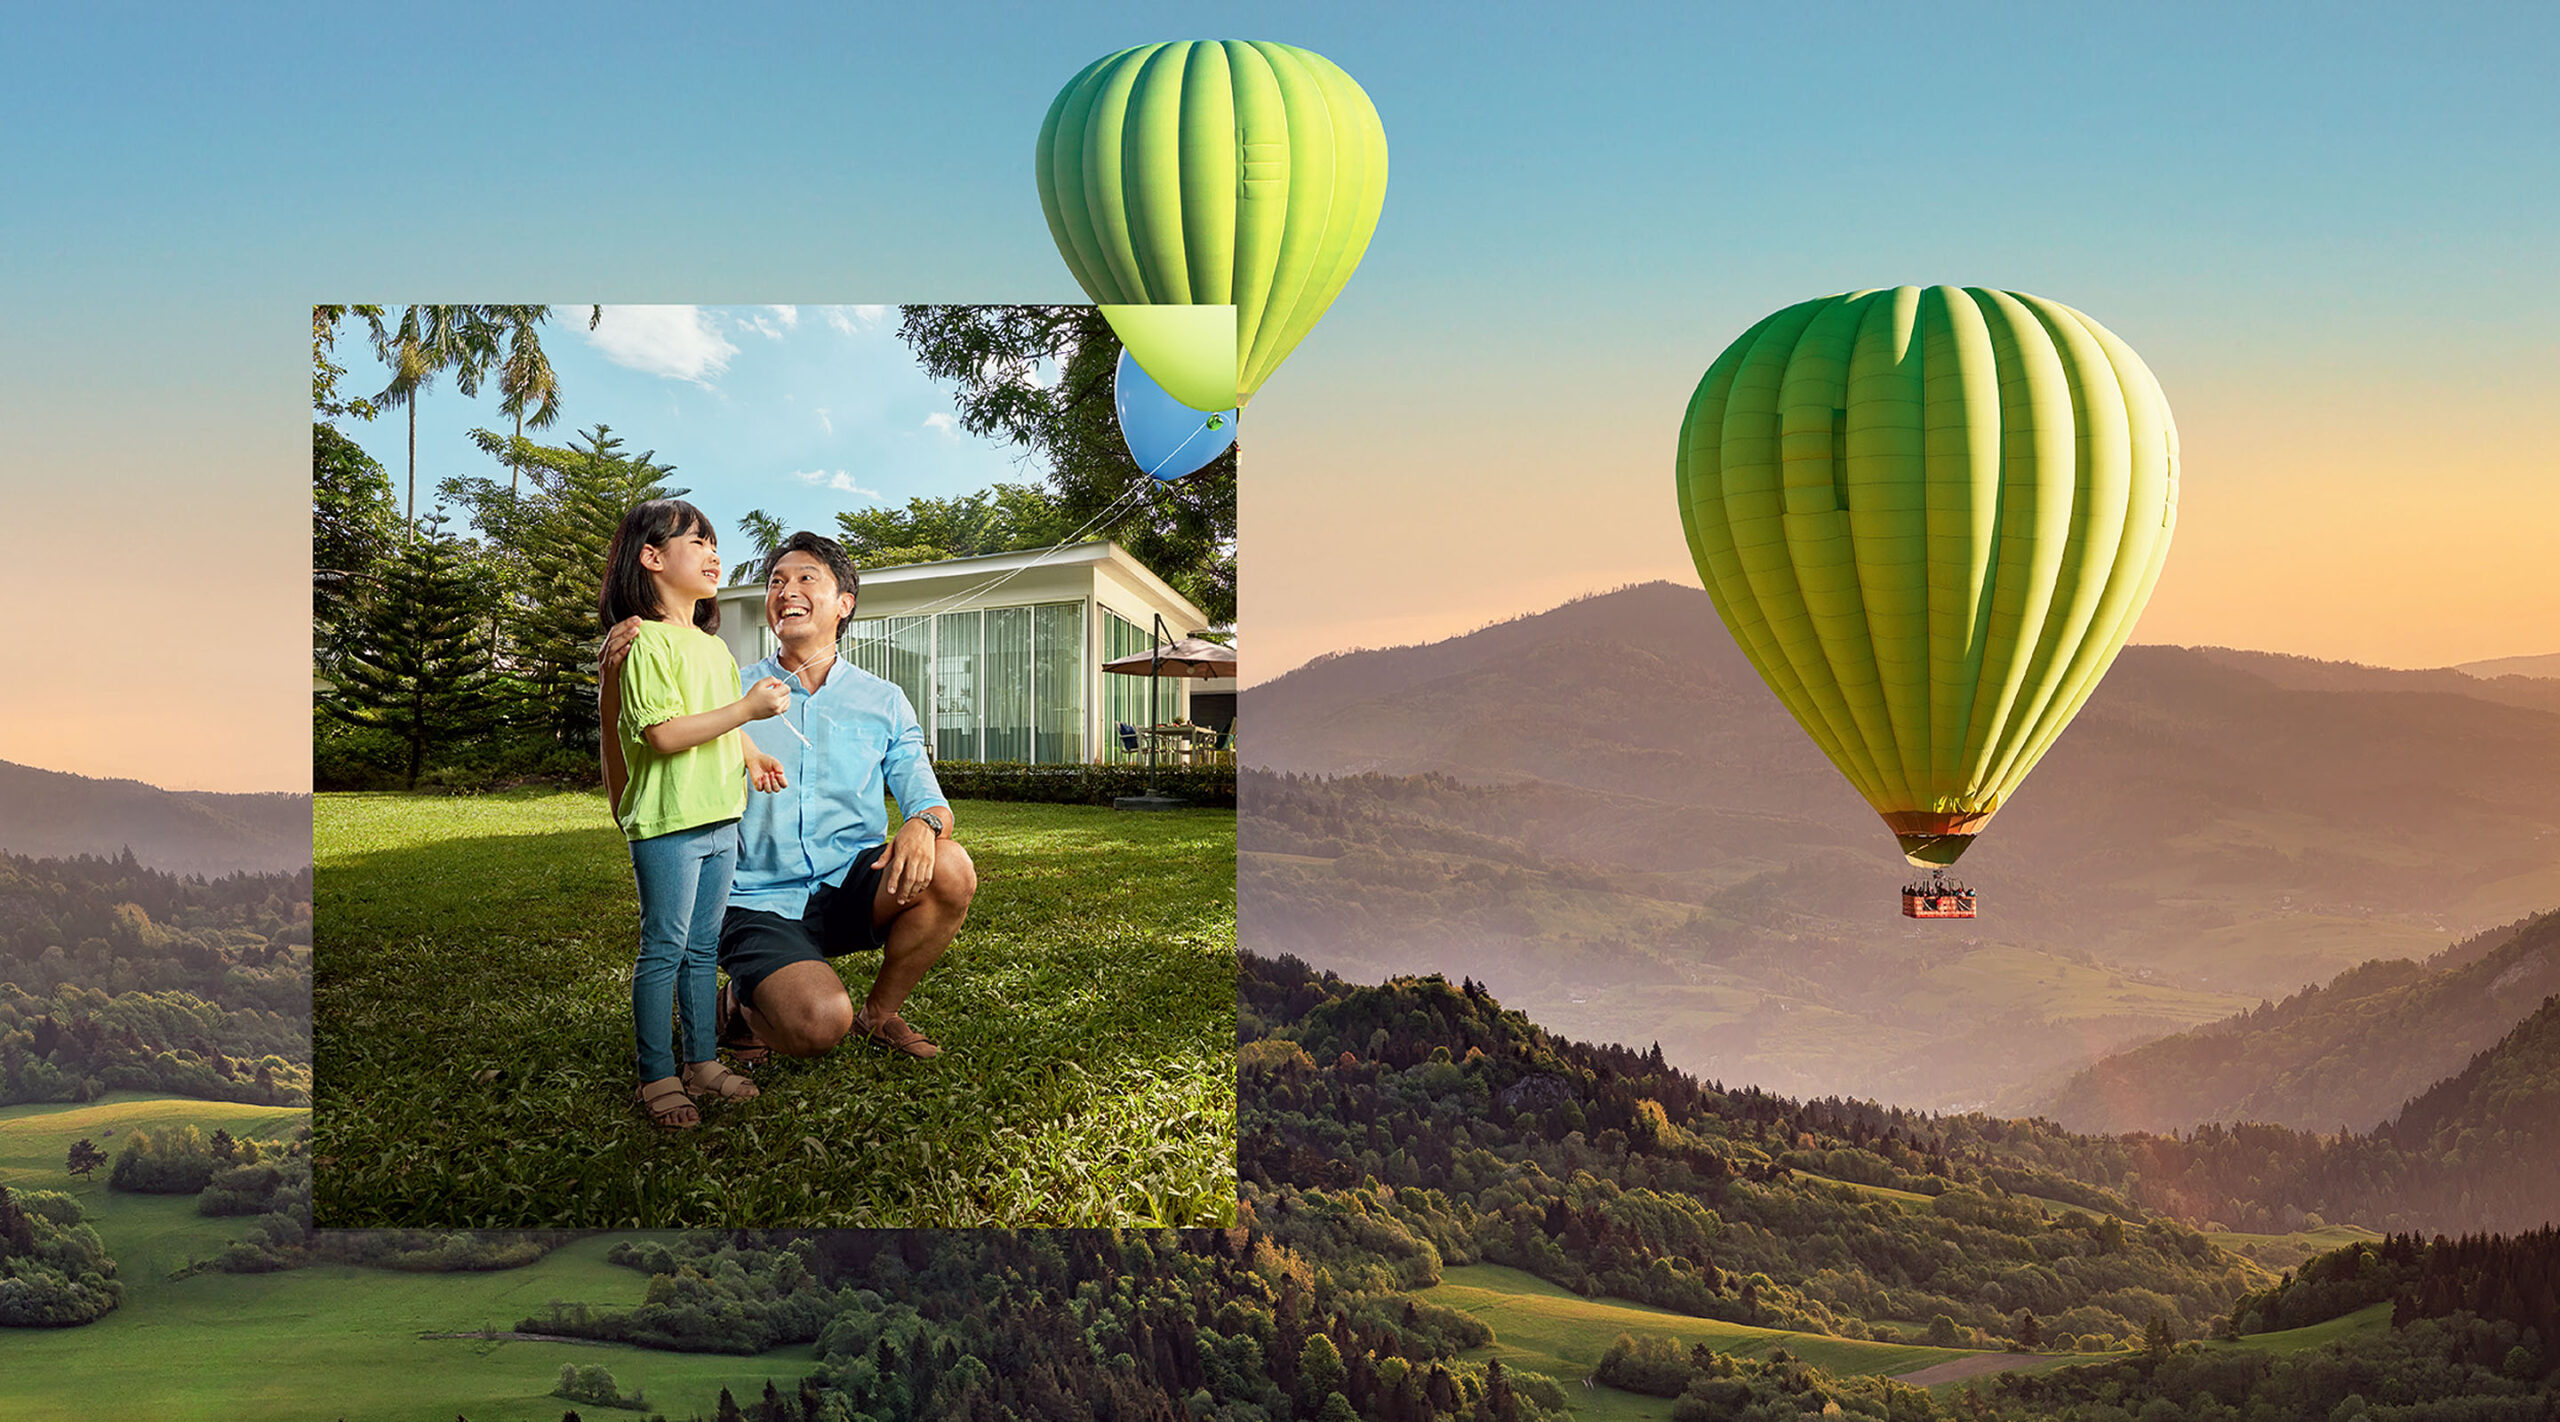 An image of a man and child flying a kite together is layered over a landscape photograph of hot air balloons, soaring over misty mountains.